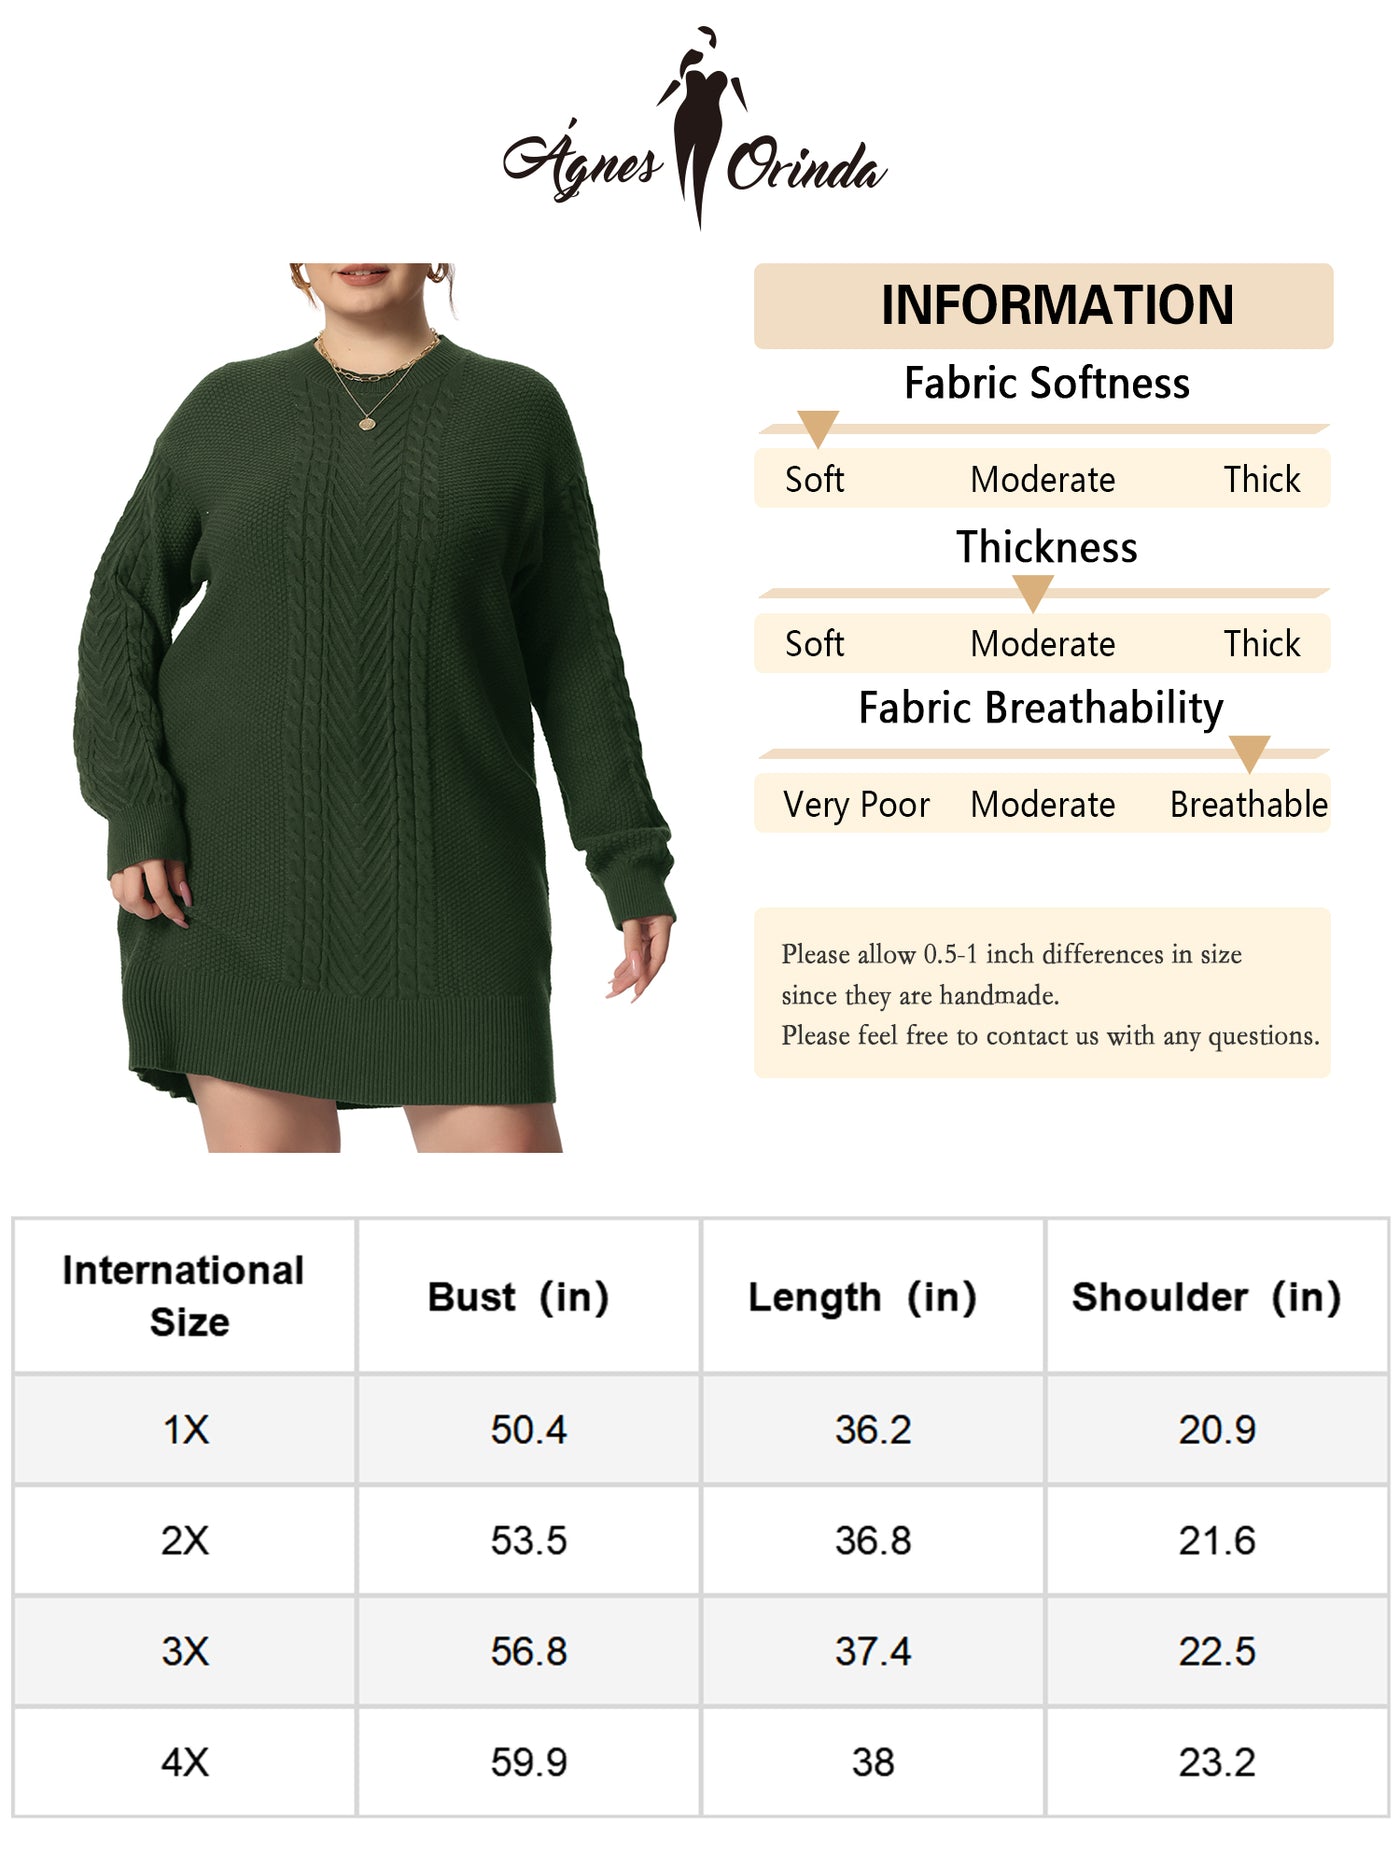 Bublédon H Line Cable Round Neck Long Sleeve Sweater Dress